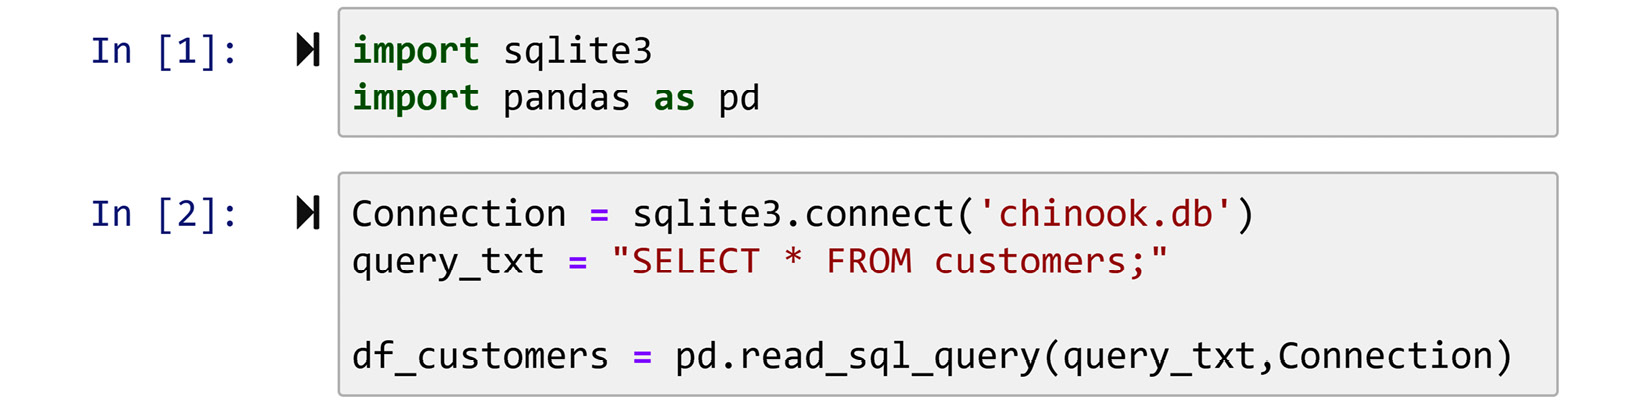 Figure 4.5 – Creating a connection to chinook.db using the sqlite3 module
